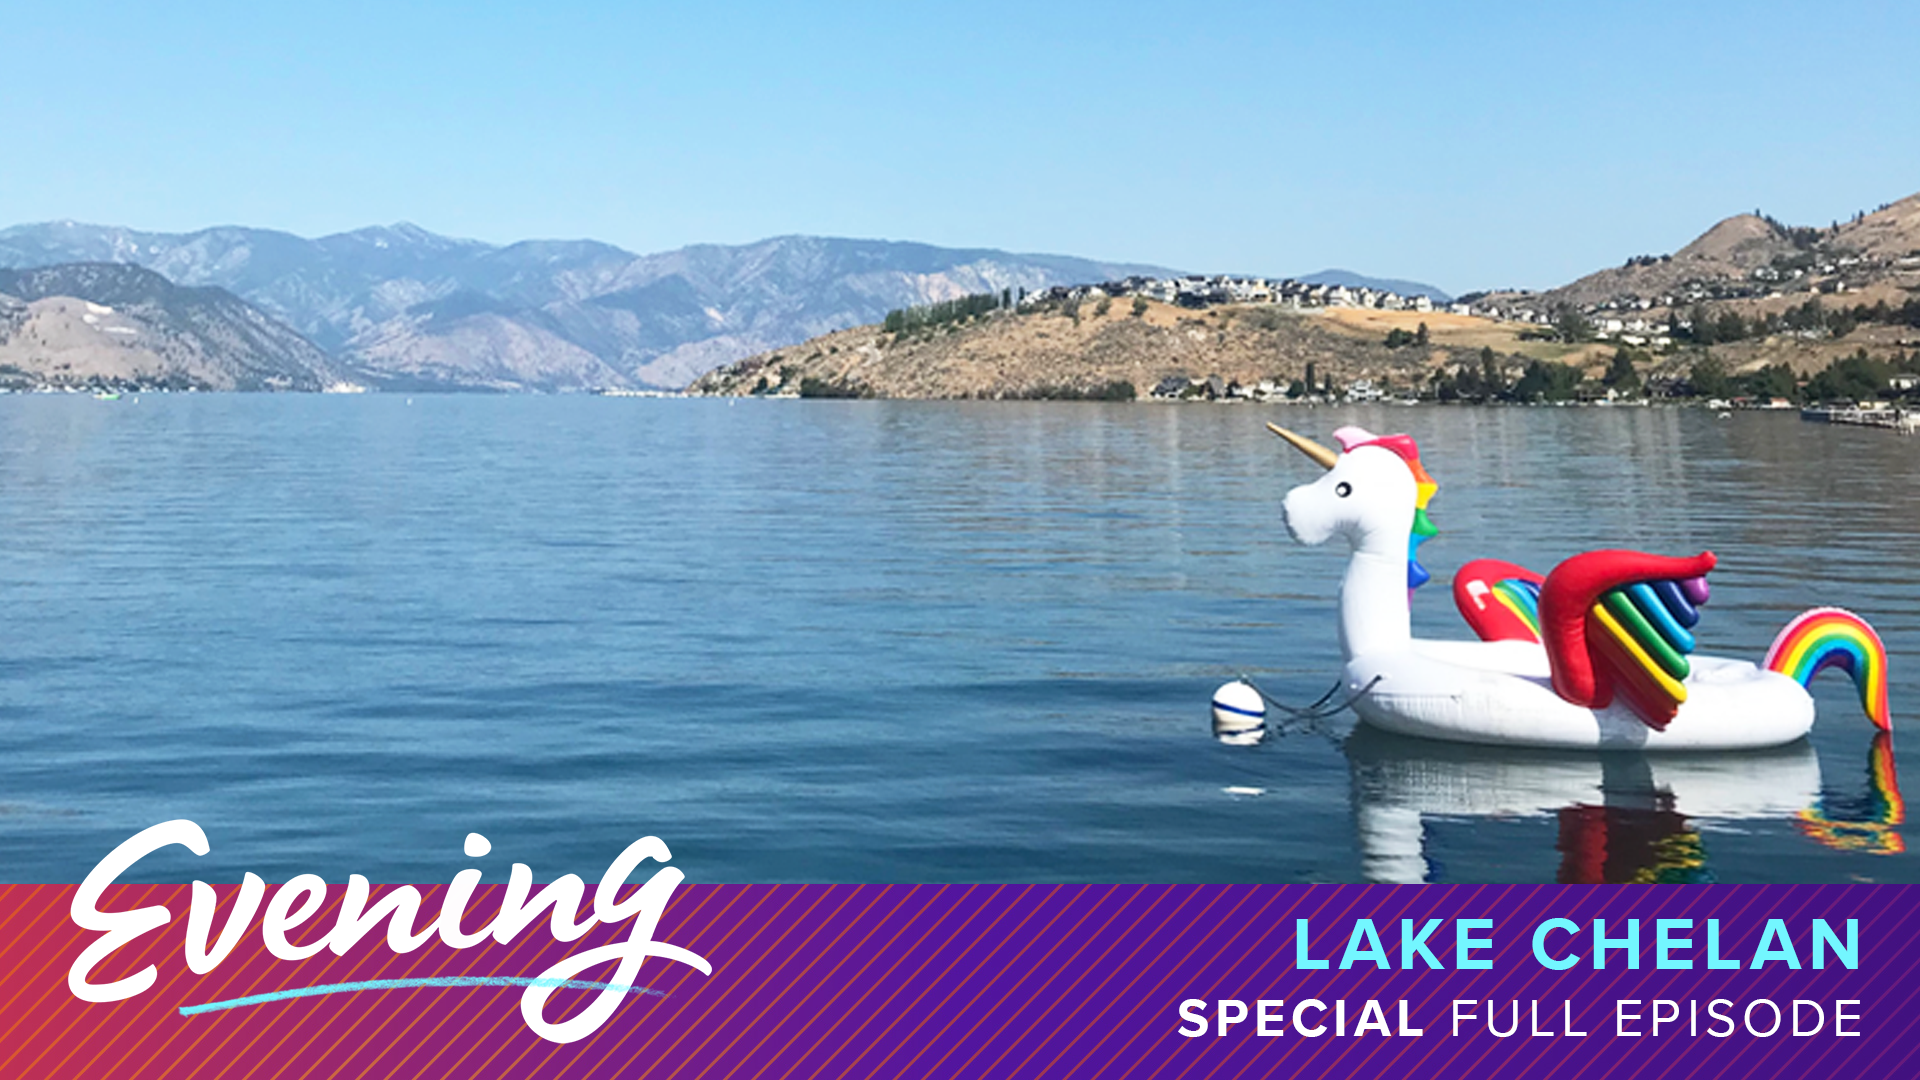 About 180 miles outside of Seattle, Lake Chelan makes for an amazing getaway. Sponsored by Visit Lake Chelan.